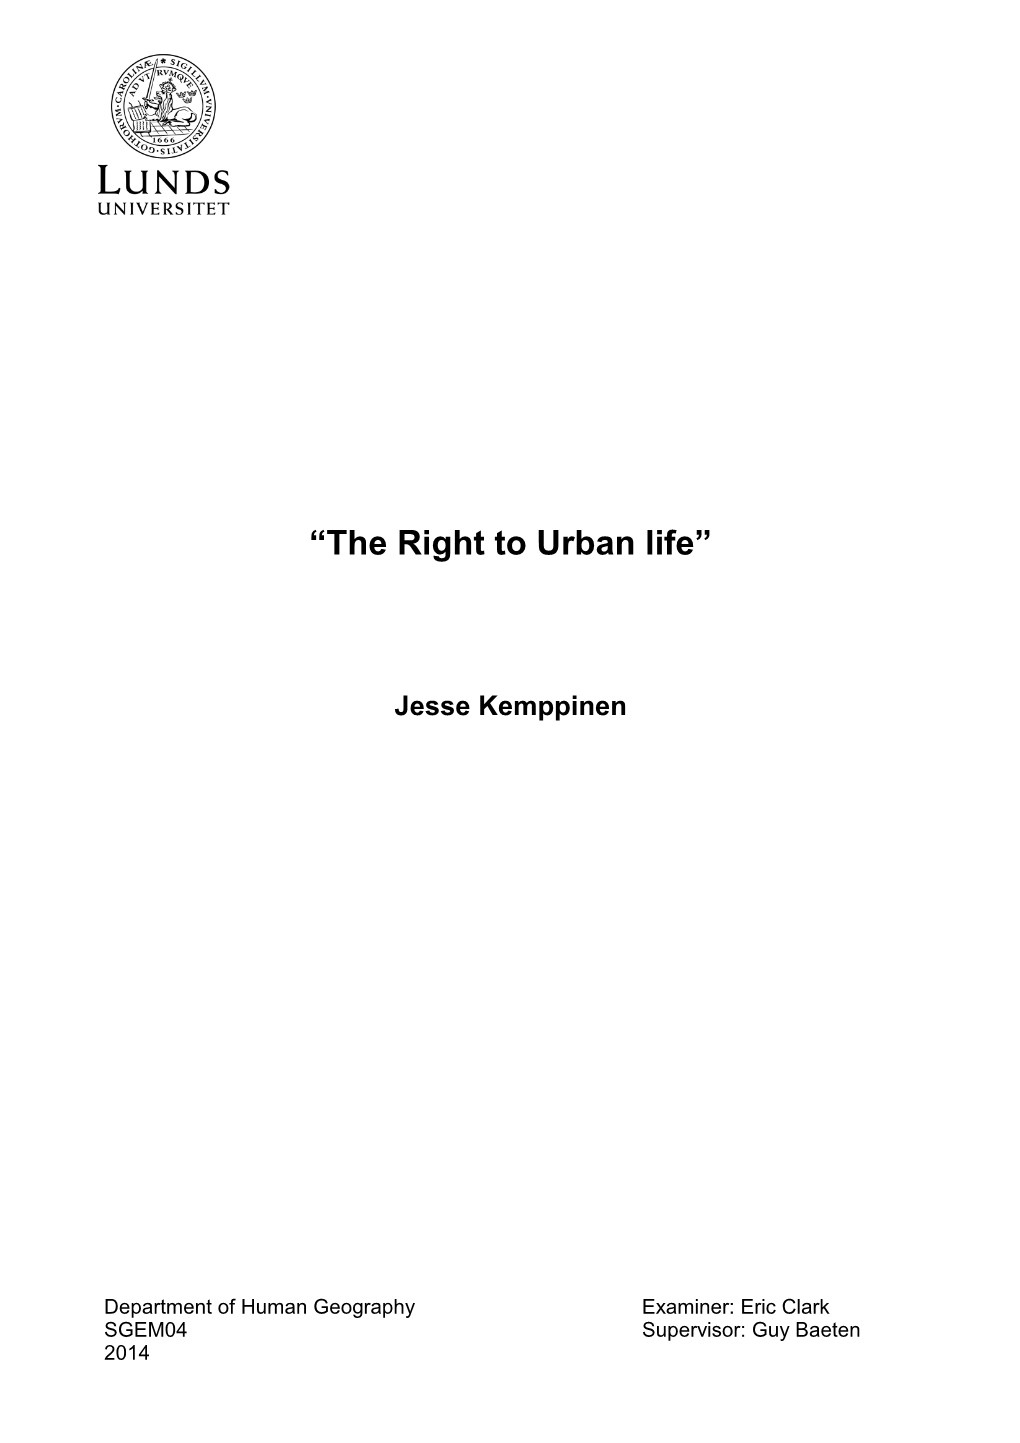 “The Right to Urban Life”